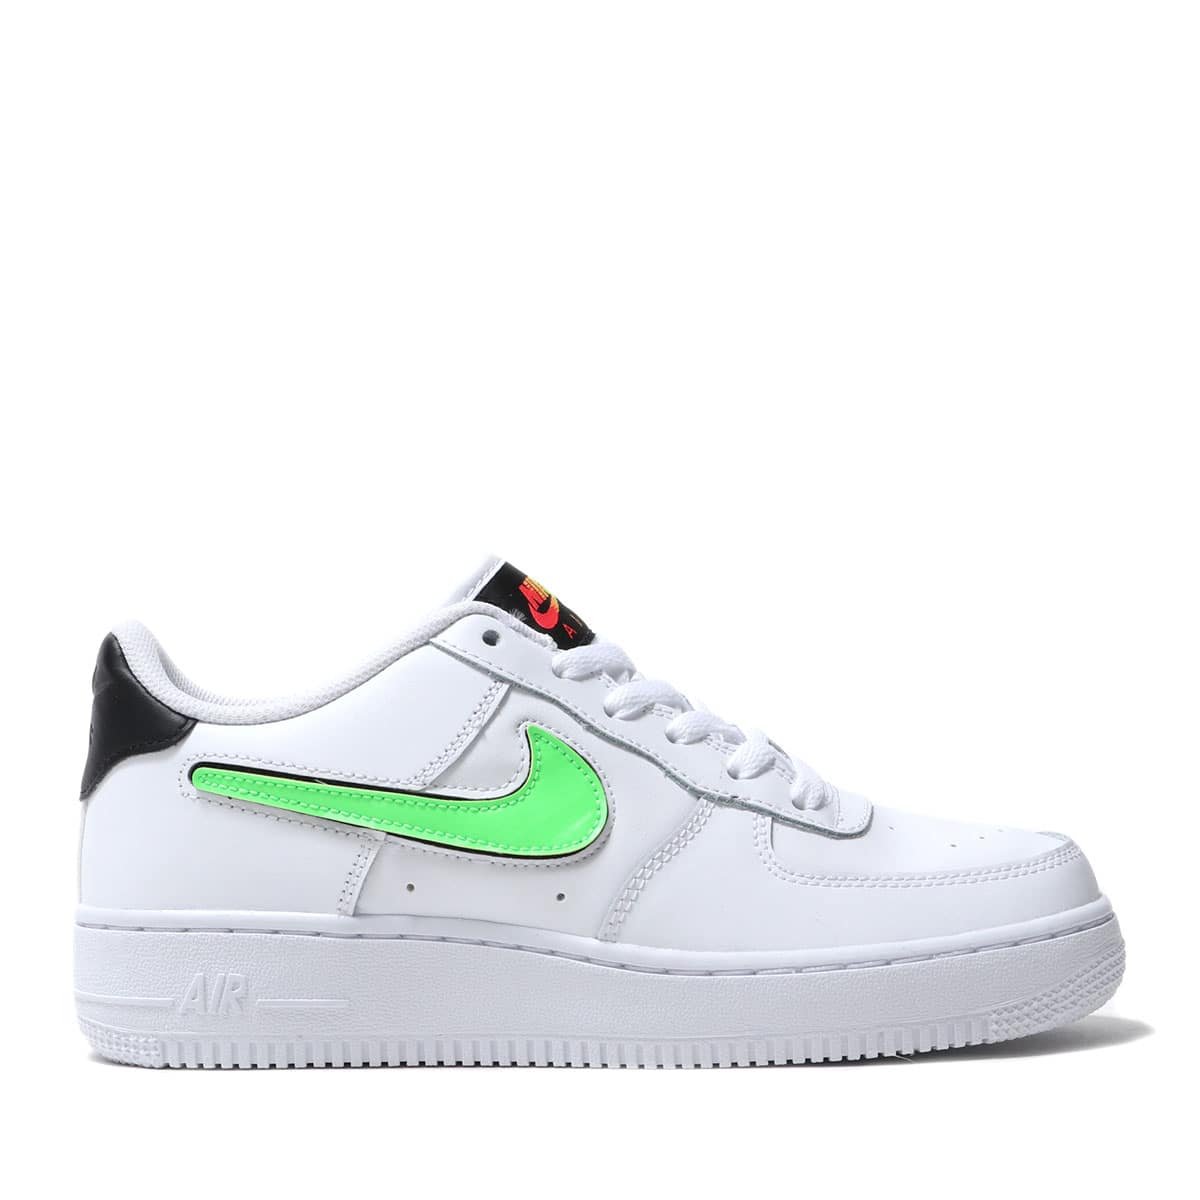 air force one lv8 3 gs